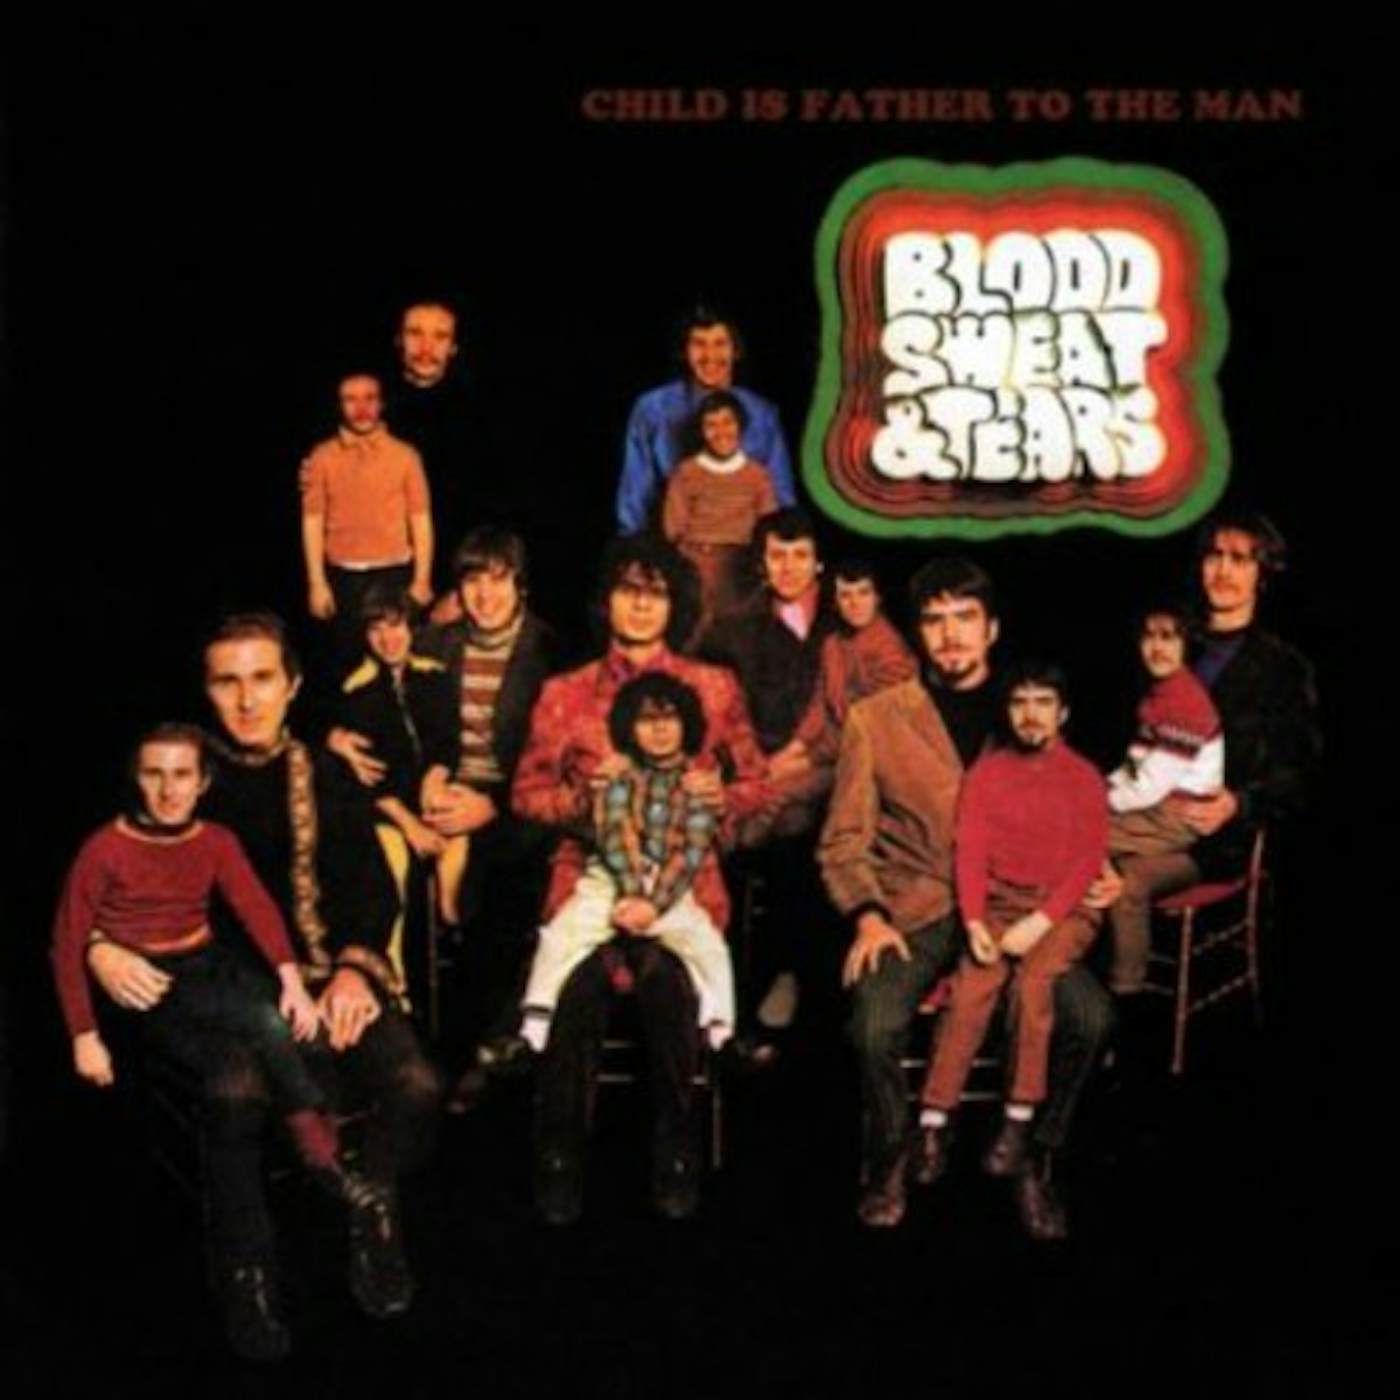 Blood, Sweat & Tears CHILD IS FATHER TO THE MAN (24BIT REMASTERED) CD